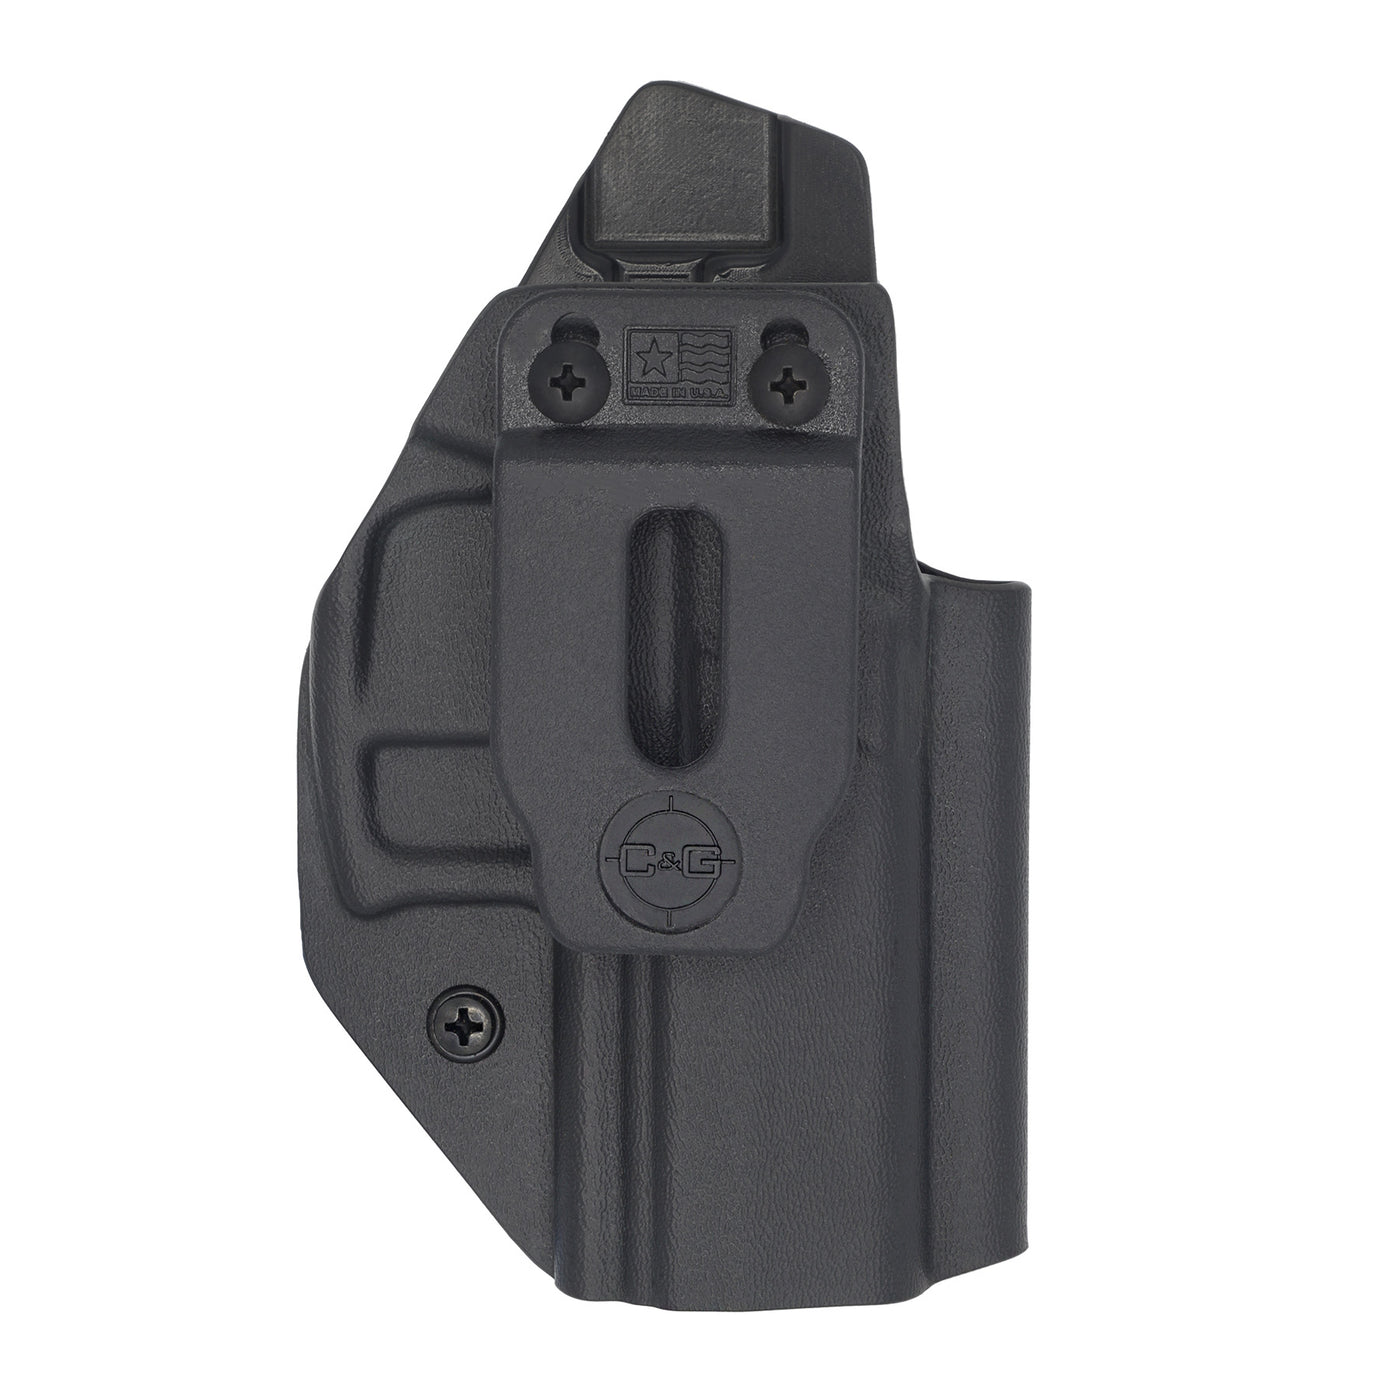 This is the custom C&G Holsters IWB inside the waistband Holster for the heckler & Koch P30sk.